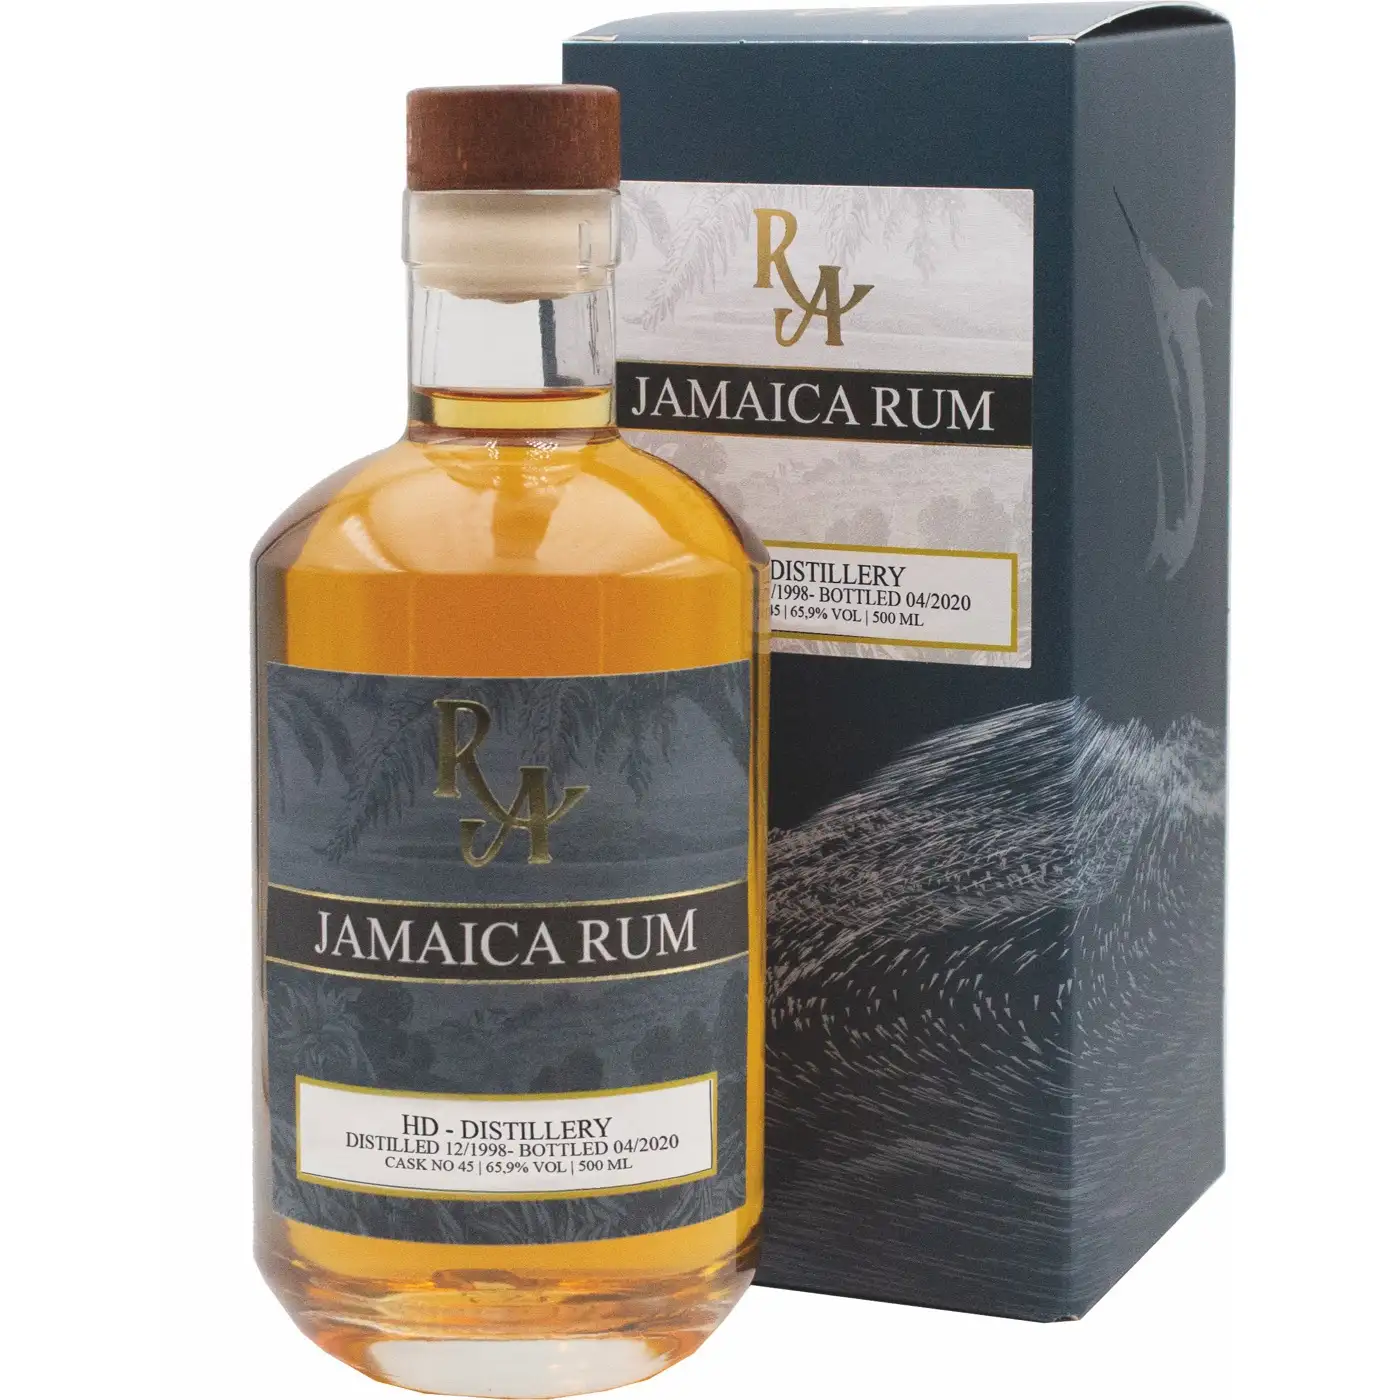 Image of the front of the bottle of the rum Rum Artesanal Jamaica Rum HLCF